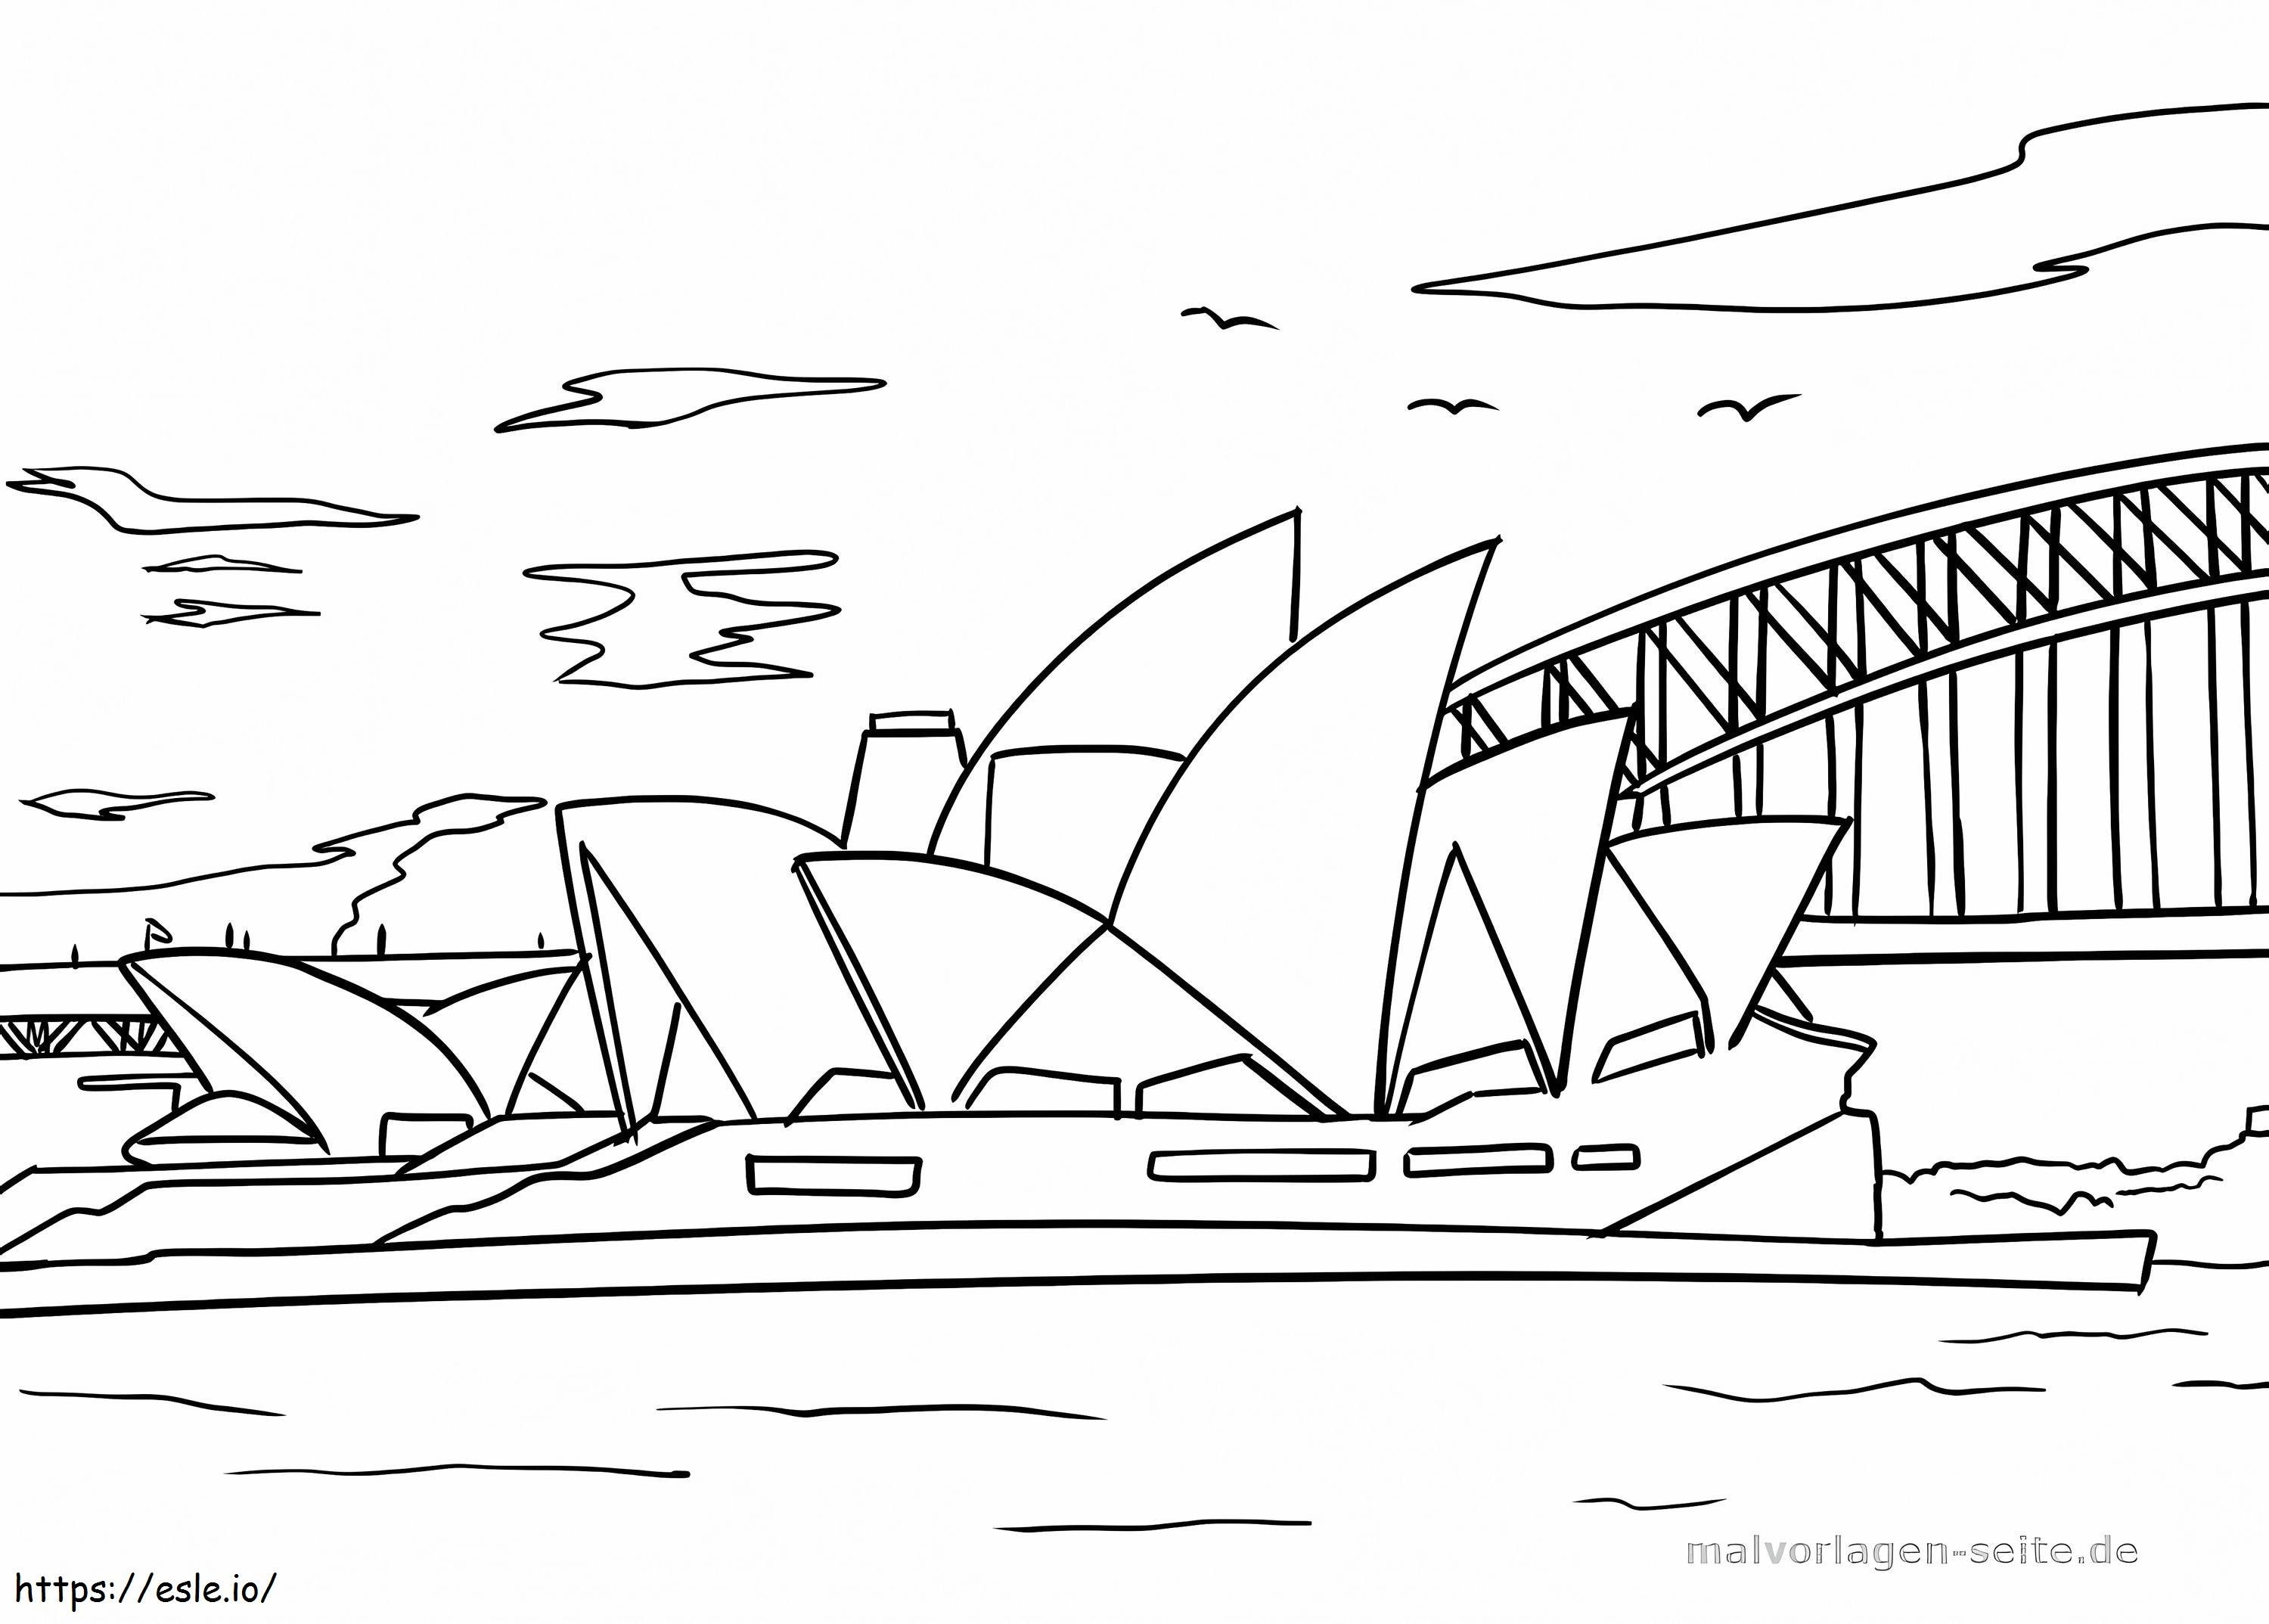 1542941539 Sydney Opera Coloring Page coloring page